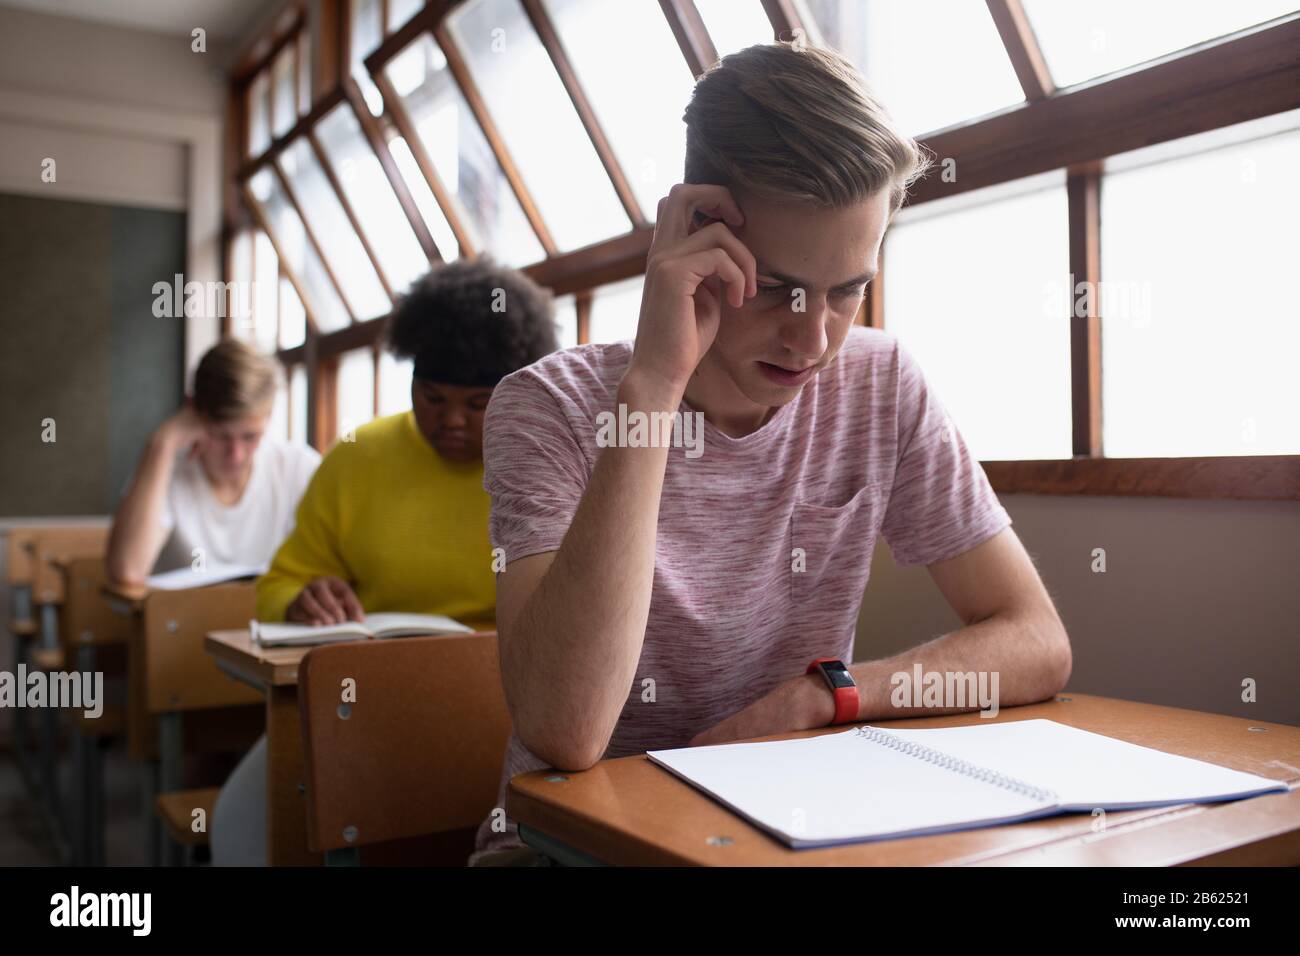 Front view of students working in class Stock Photo